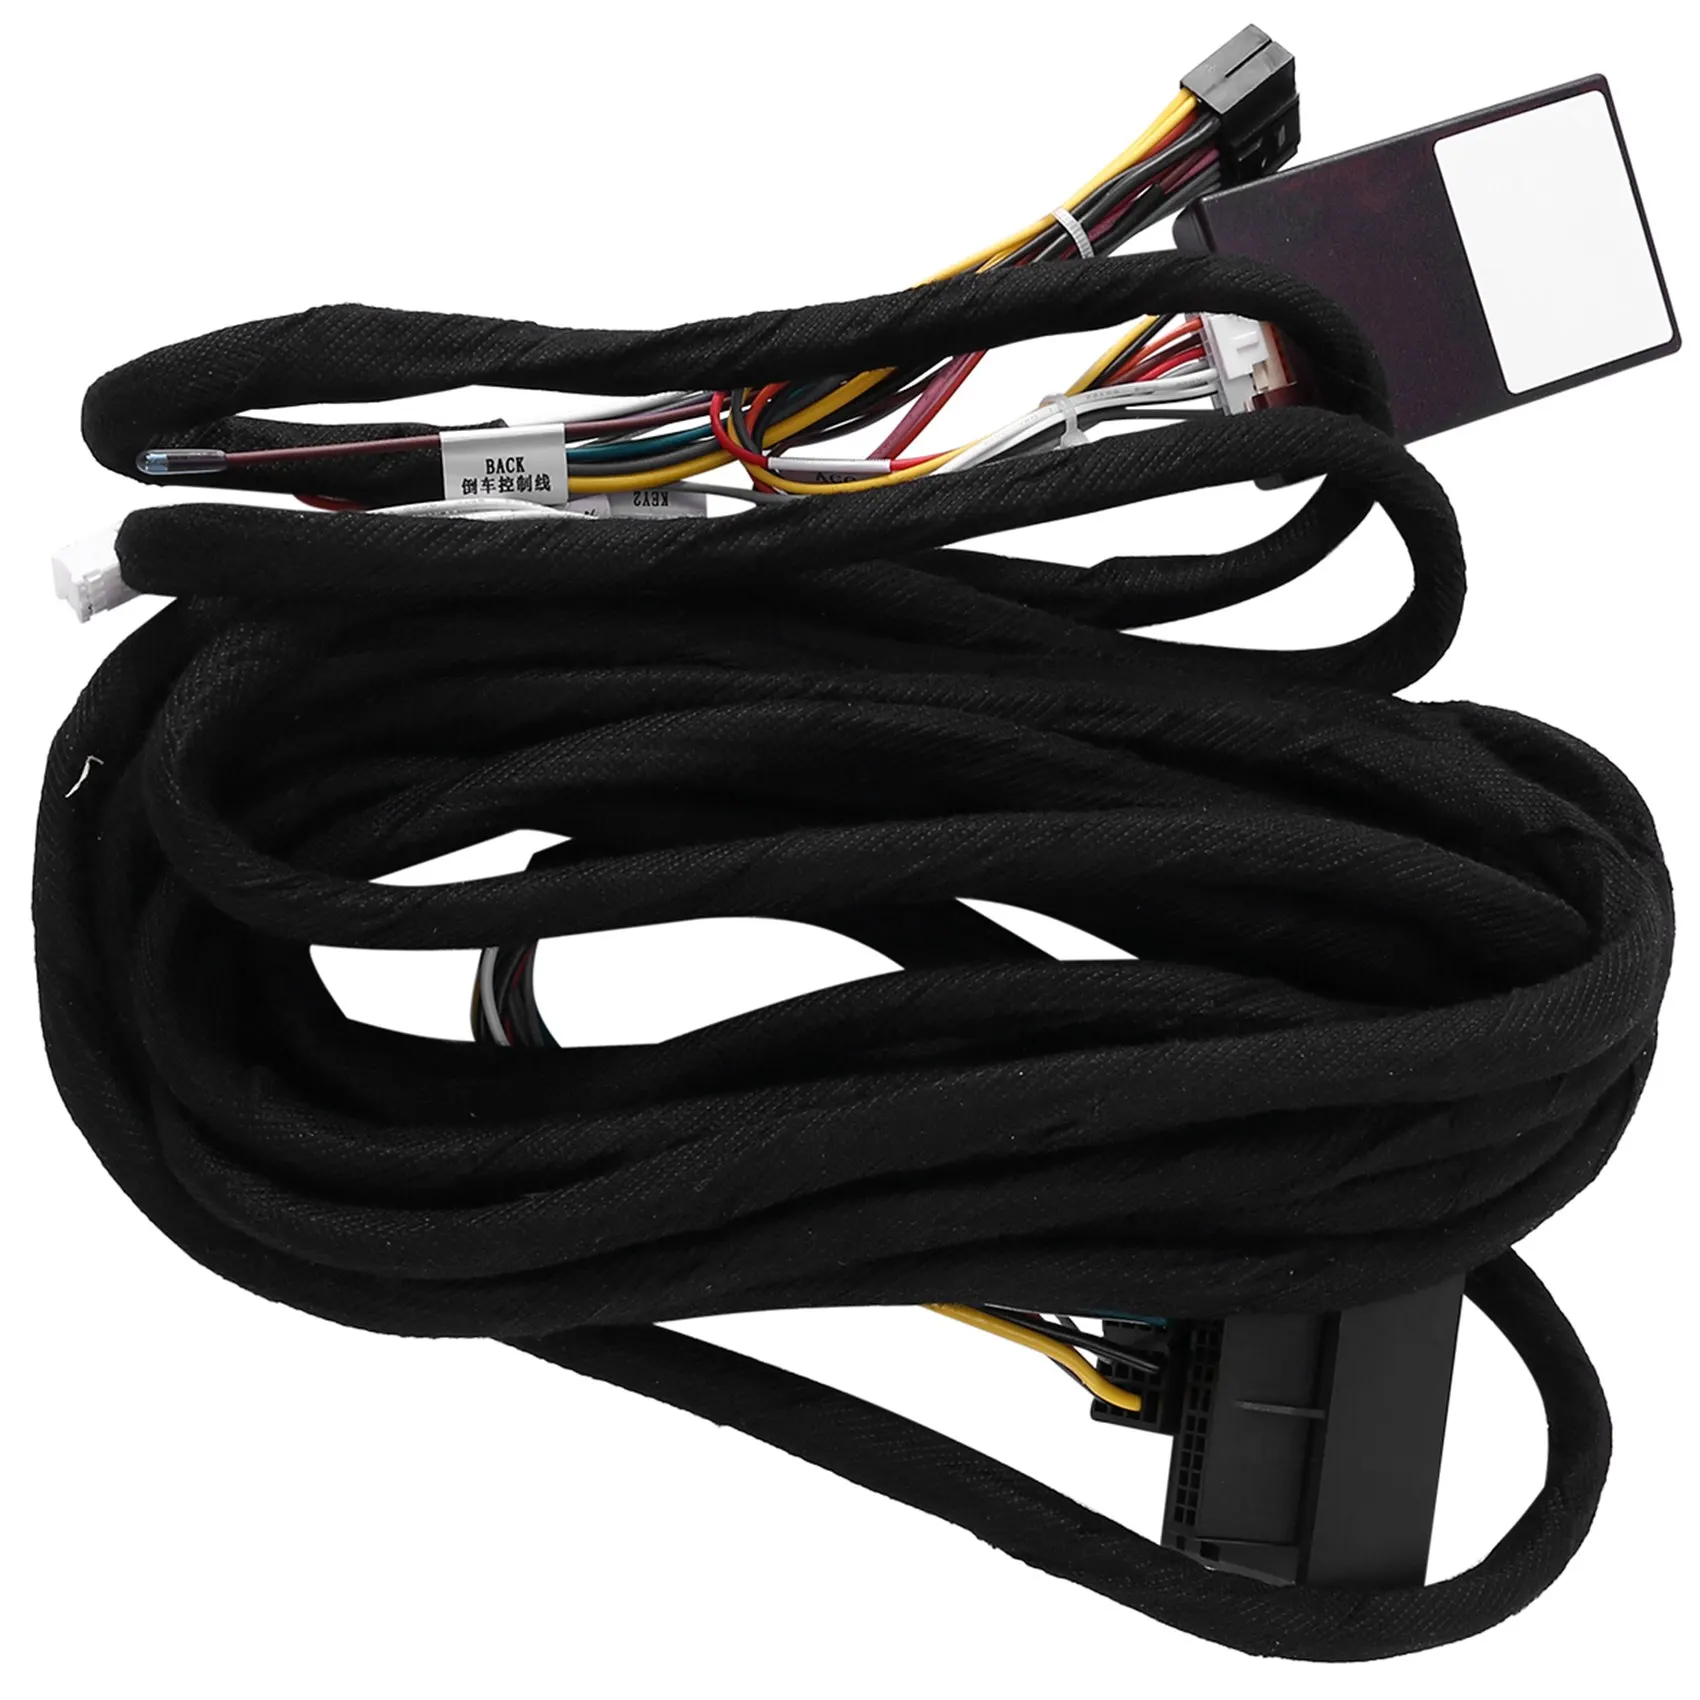 

Car 16Pin 6-Meter Extended Wiring Harness Cable with Canbus For-BMW E39(01-04)/E53(01-05) Install Android Stereo Player